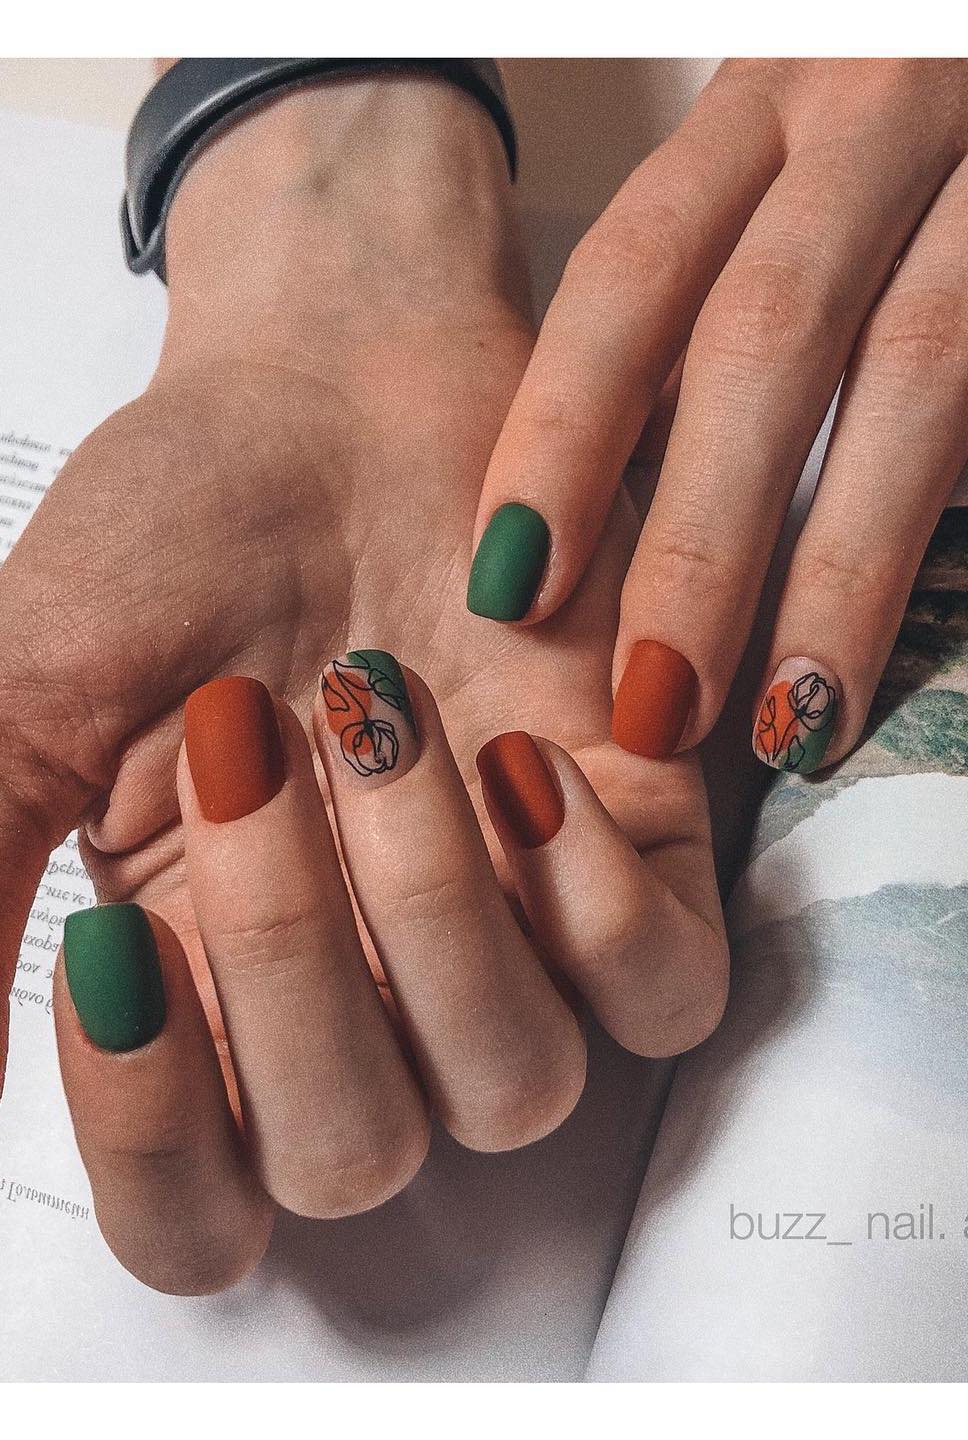 a hand with short square nails painted in matte dark green and burnt orange with a nude accent nail featuring both shades and black floral line art